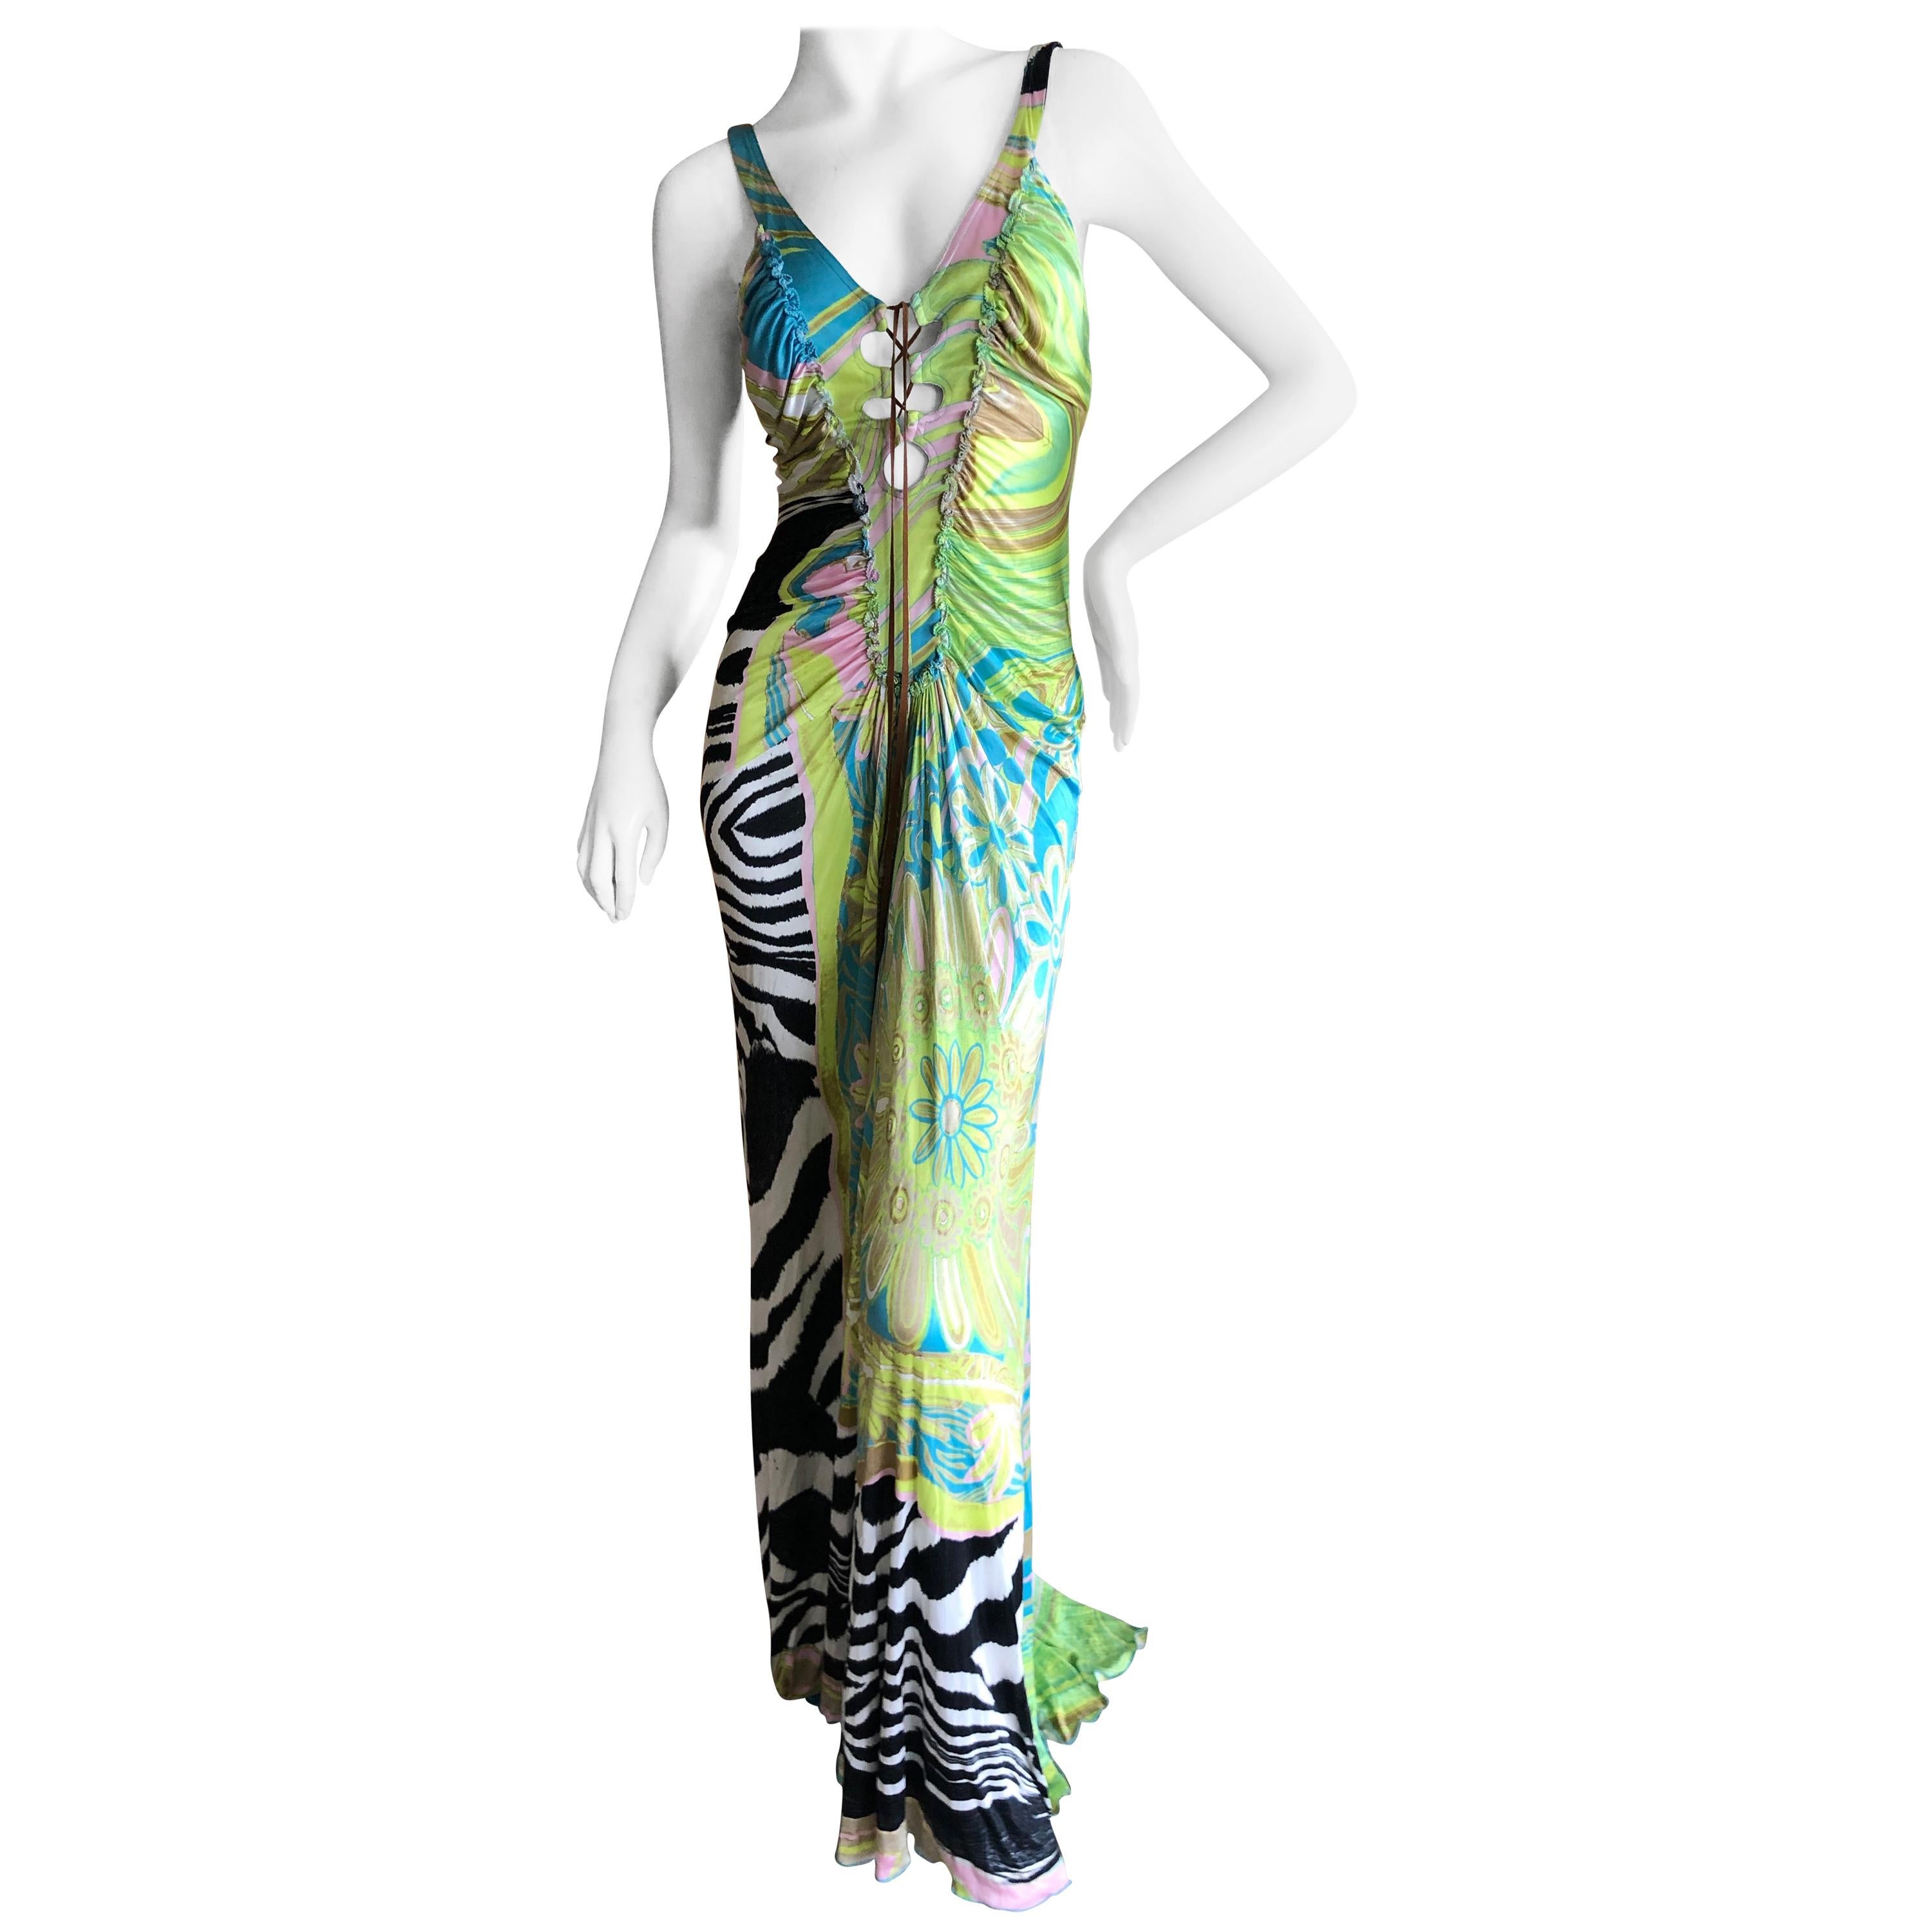 Roberto Cavalli Vintage Multi Print Evening Dress with Lace Up Details For Sale